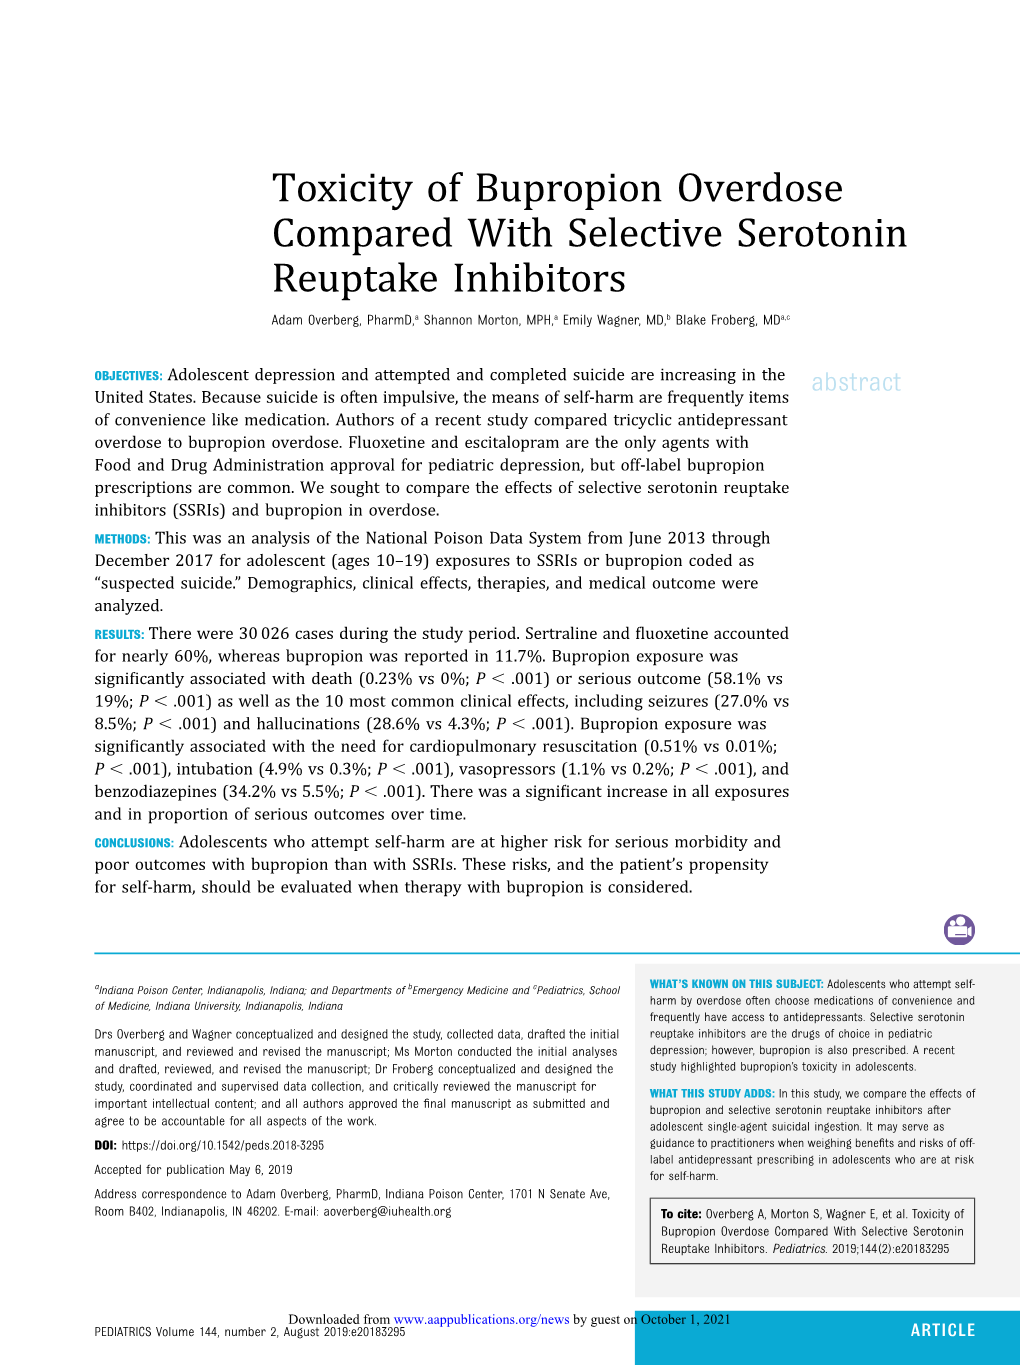 Toxicity of Bupropion Overdose Compared with Selective Serotonin